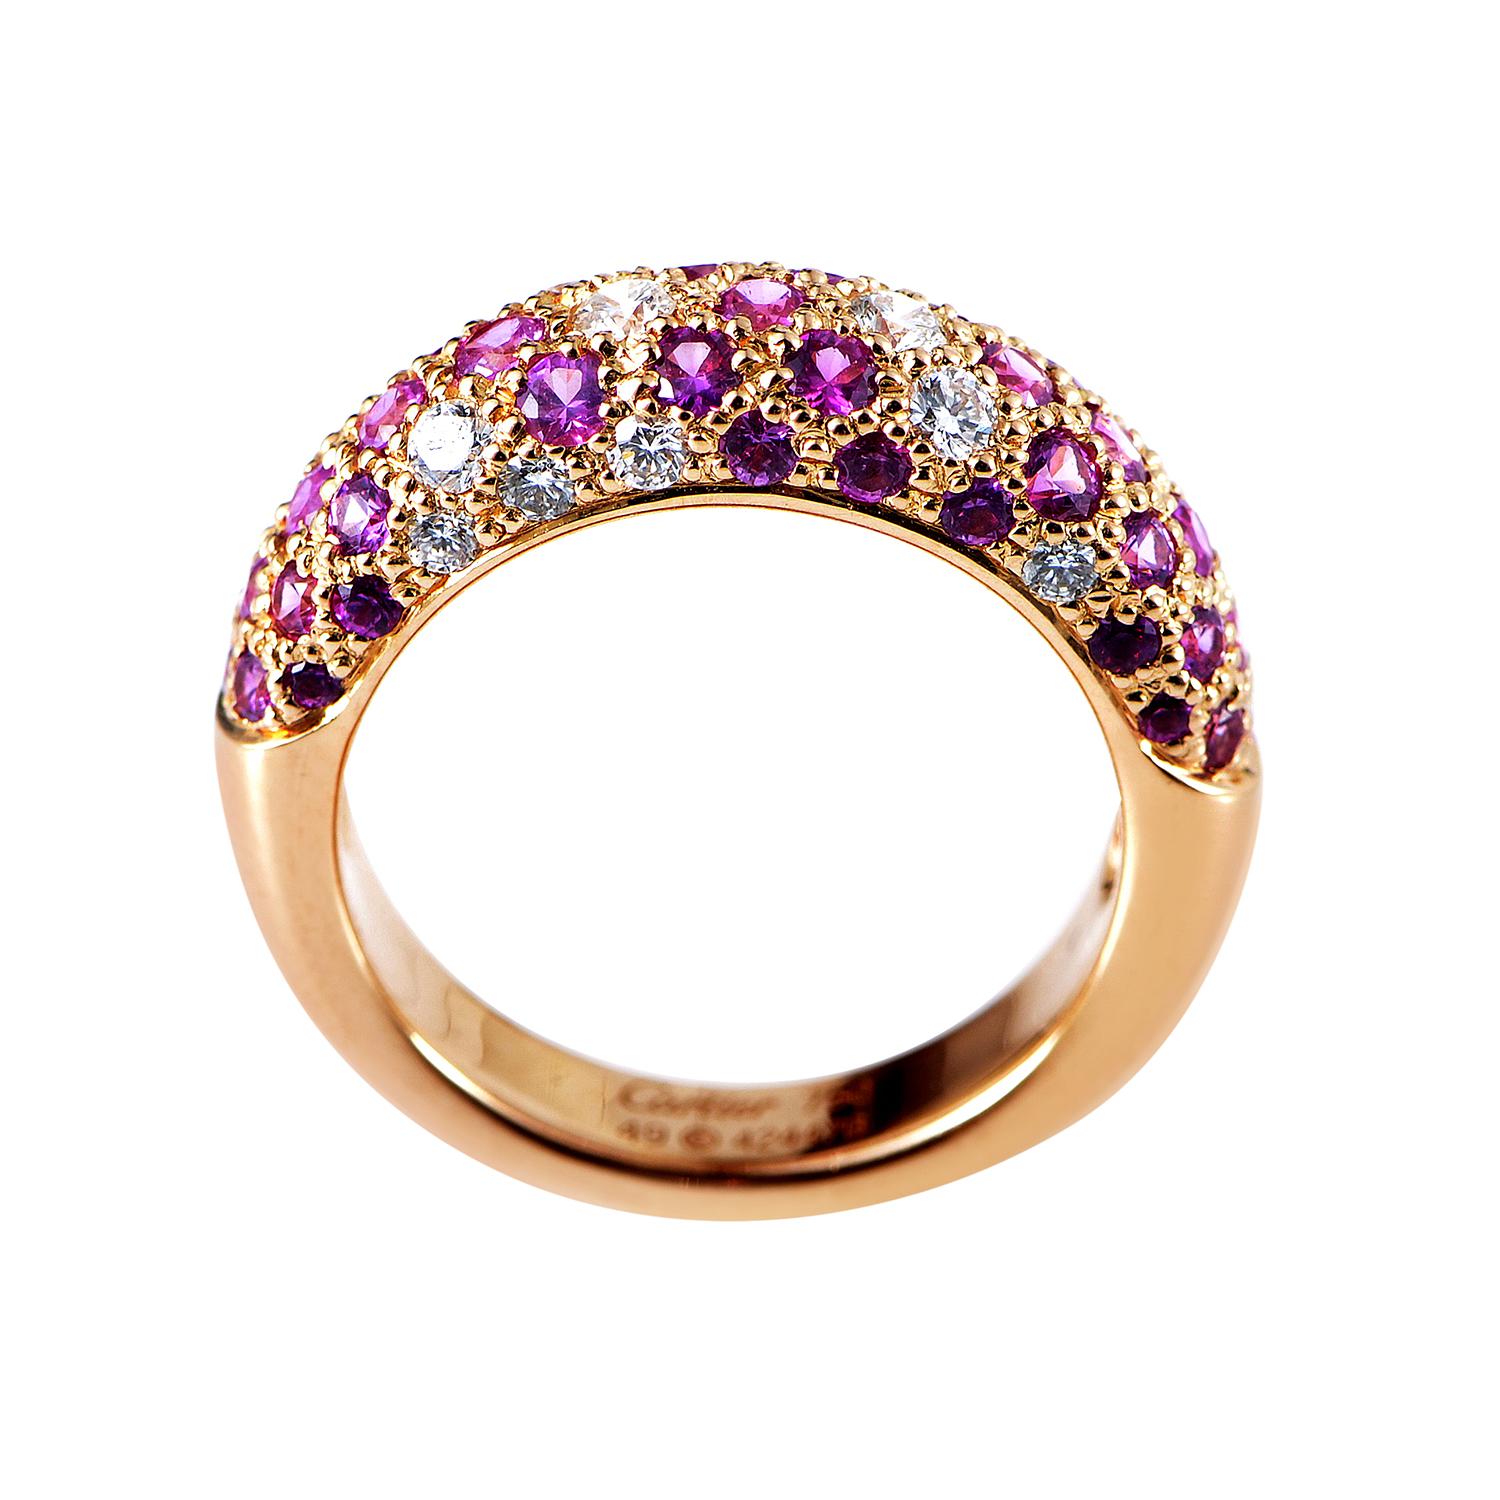 Featuring the ever-enchanting combination of charming nuance of 18K rose gold and lovely appeal of splendid white diamonds and feminine purple sapphires, this spectacular ring from renowned Cartier boasts exceptional design, offering dazzling